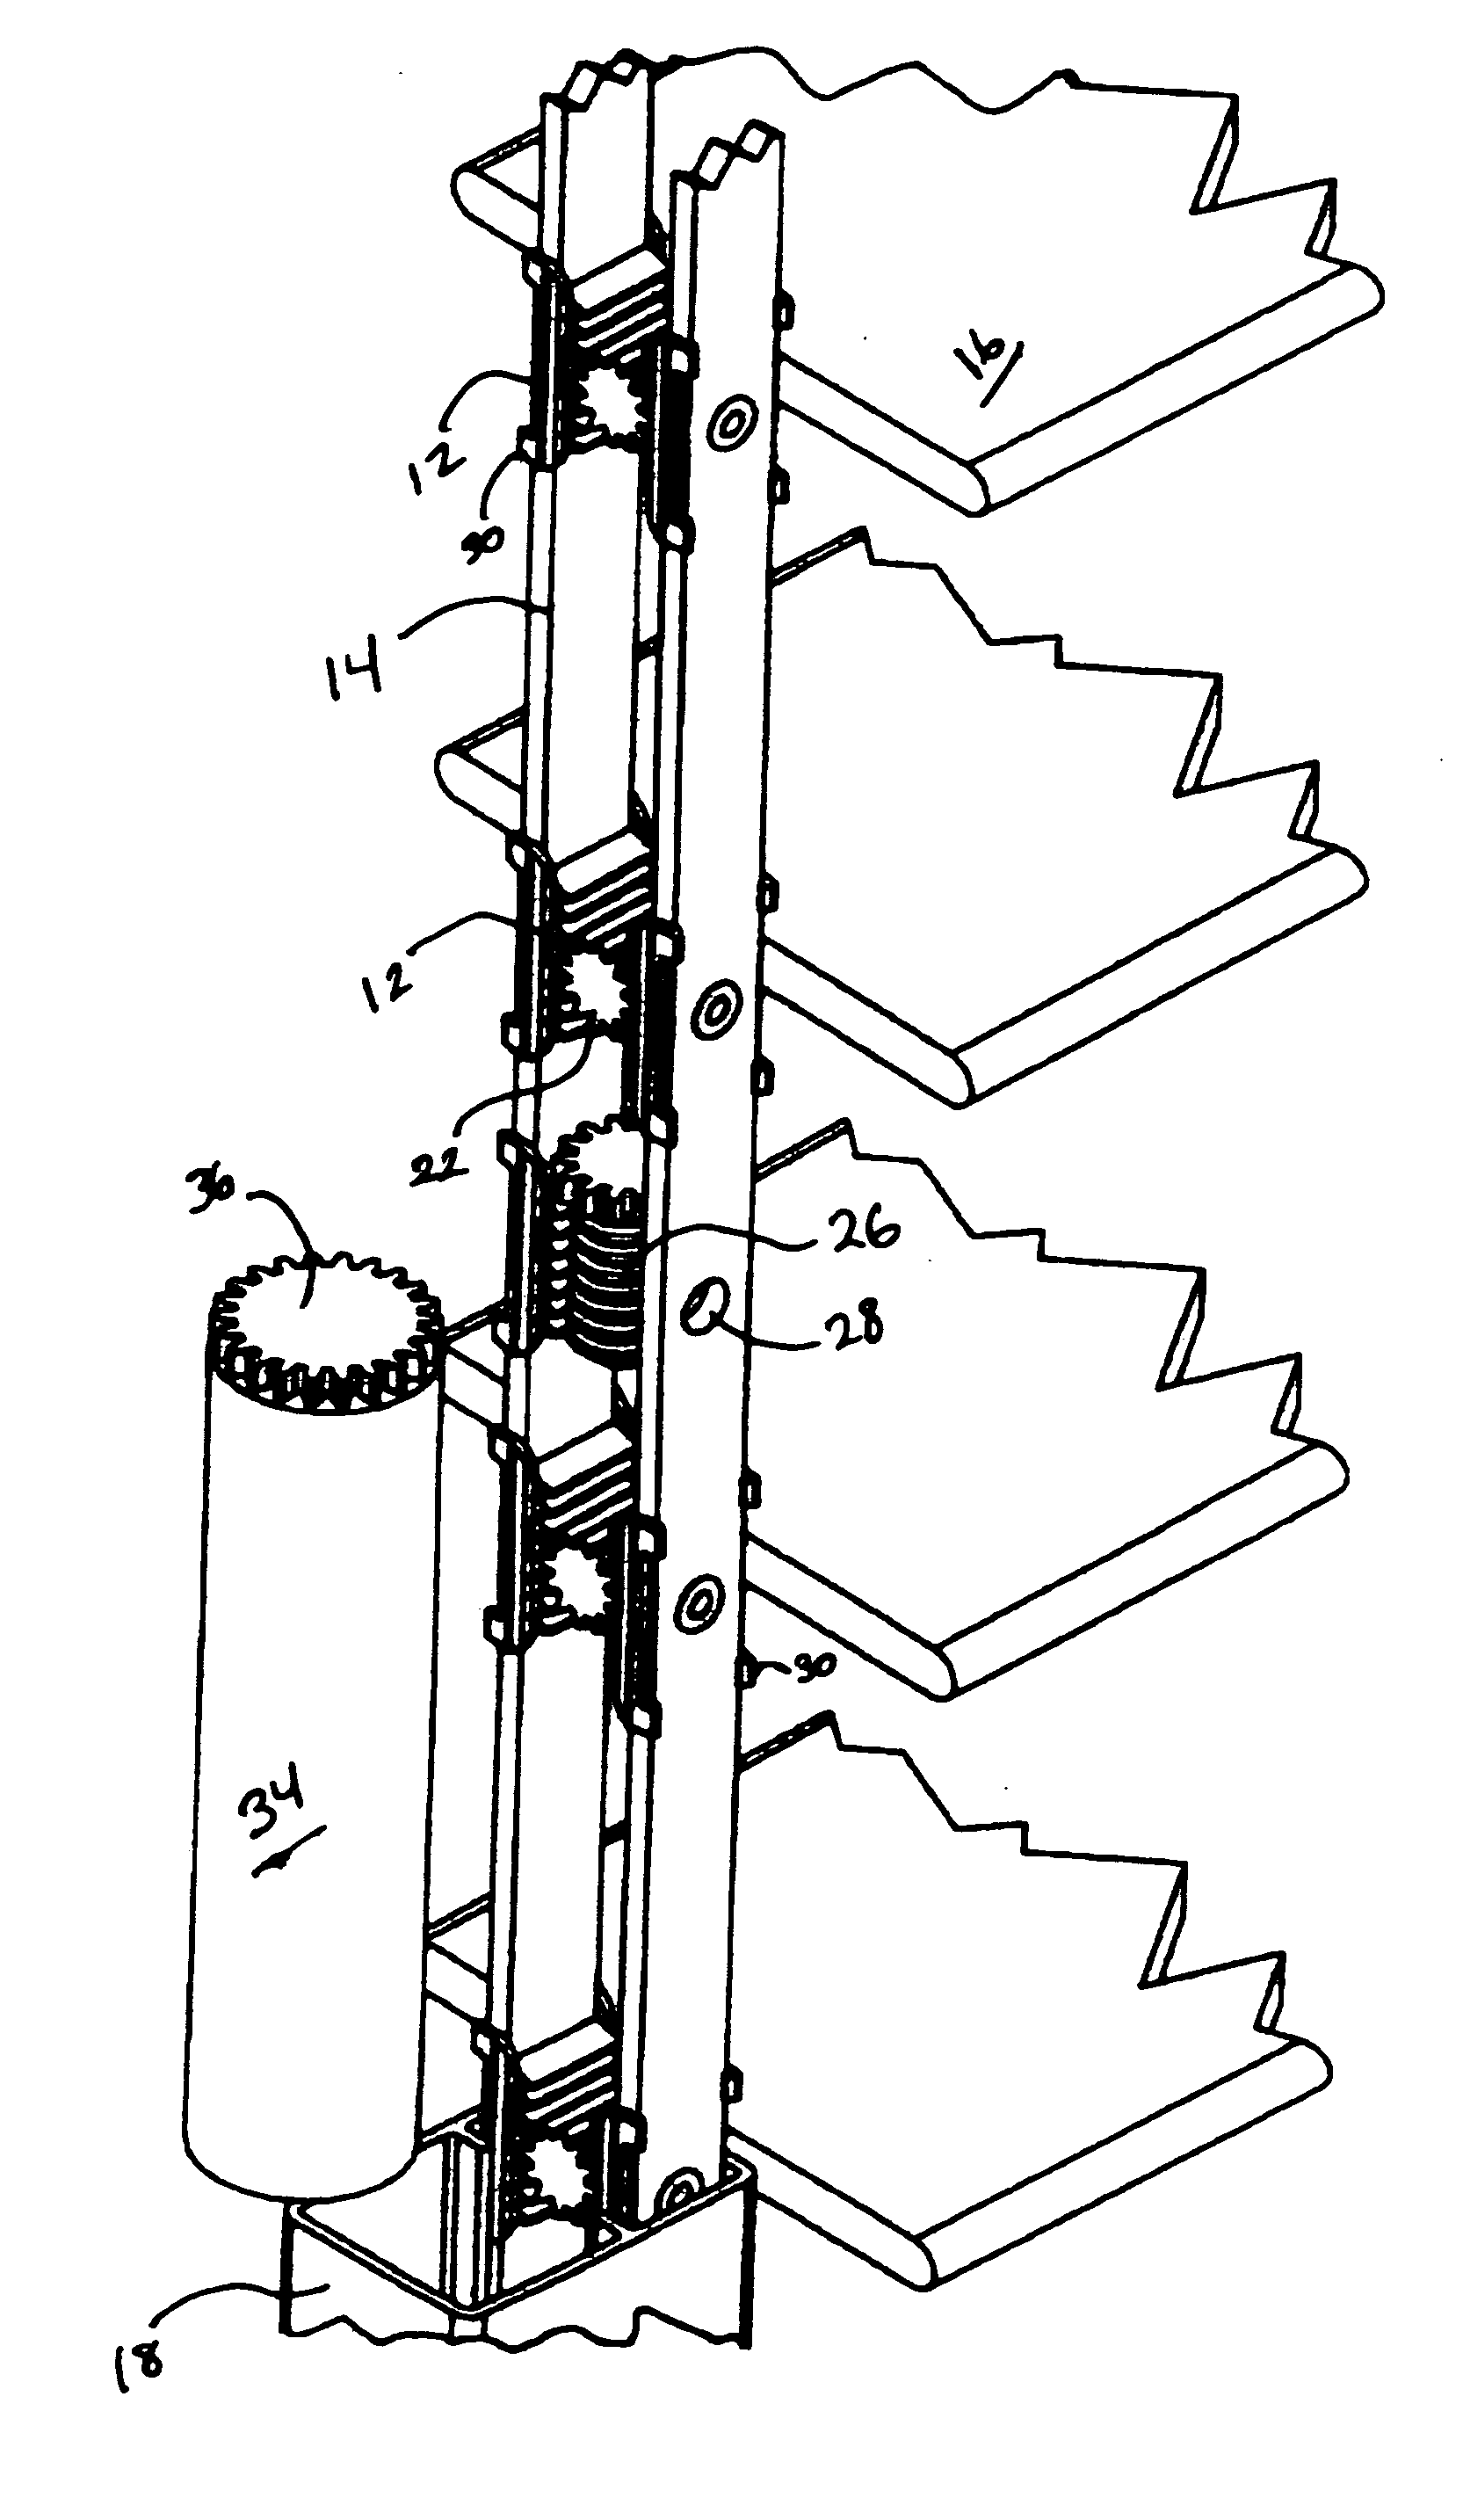 Louver rotation apparatus and method